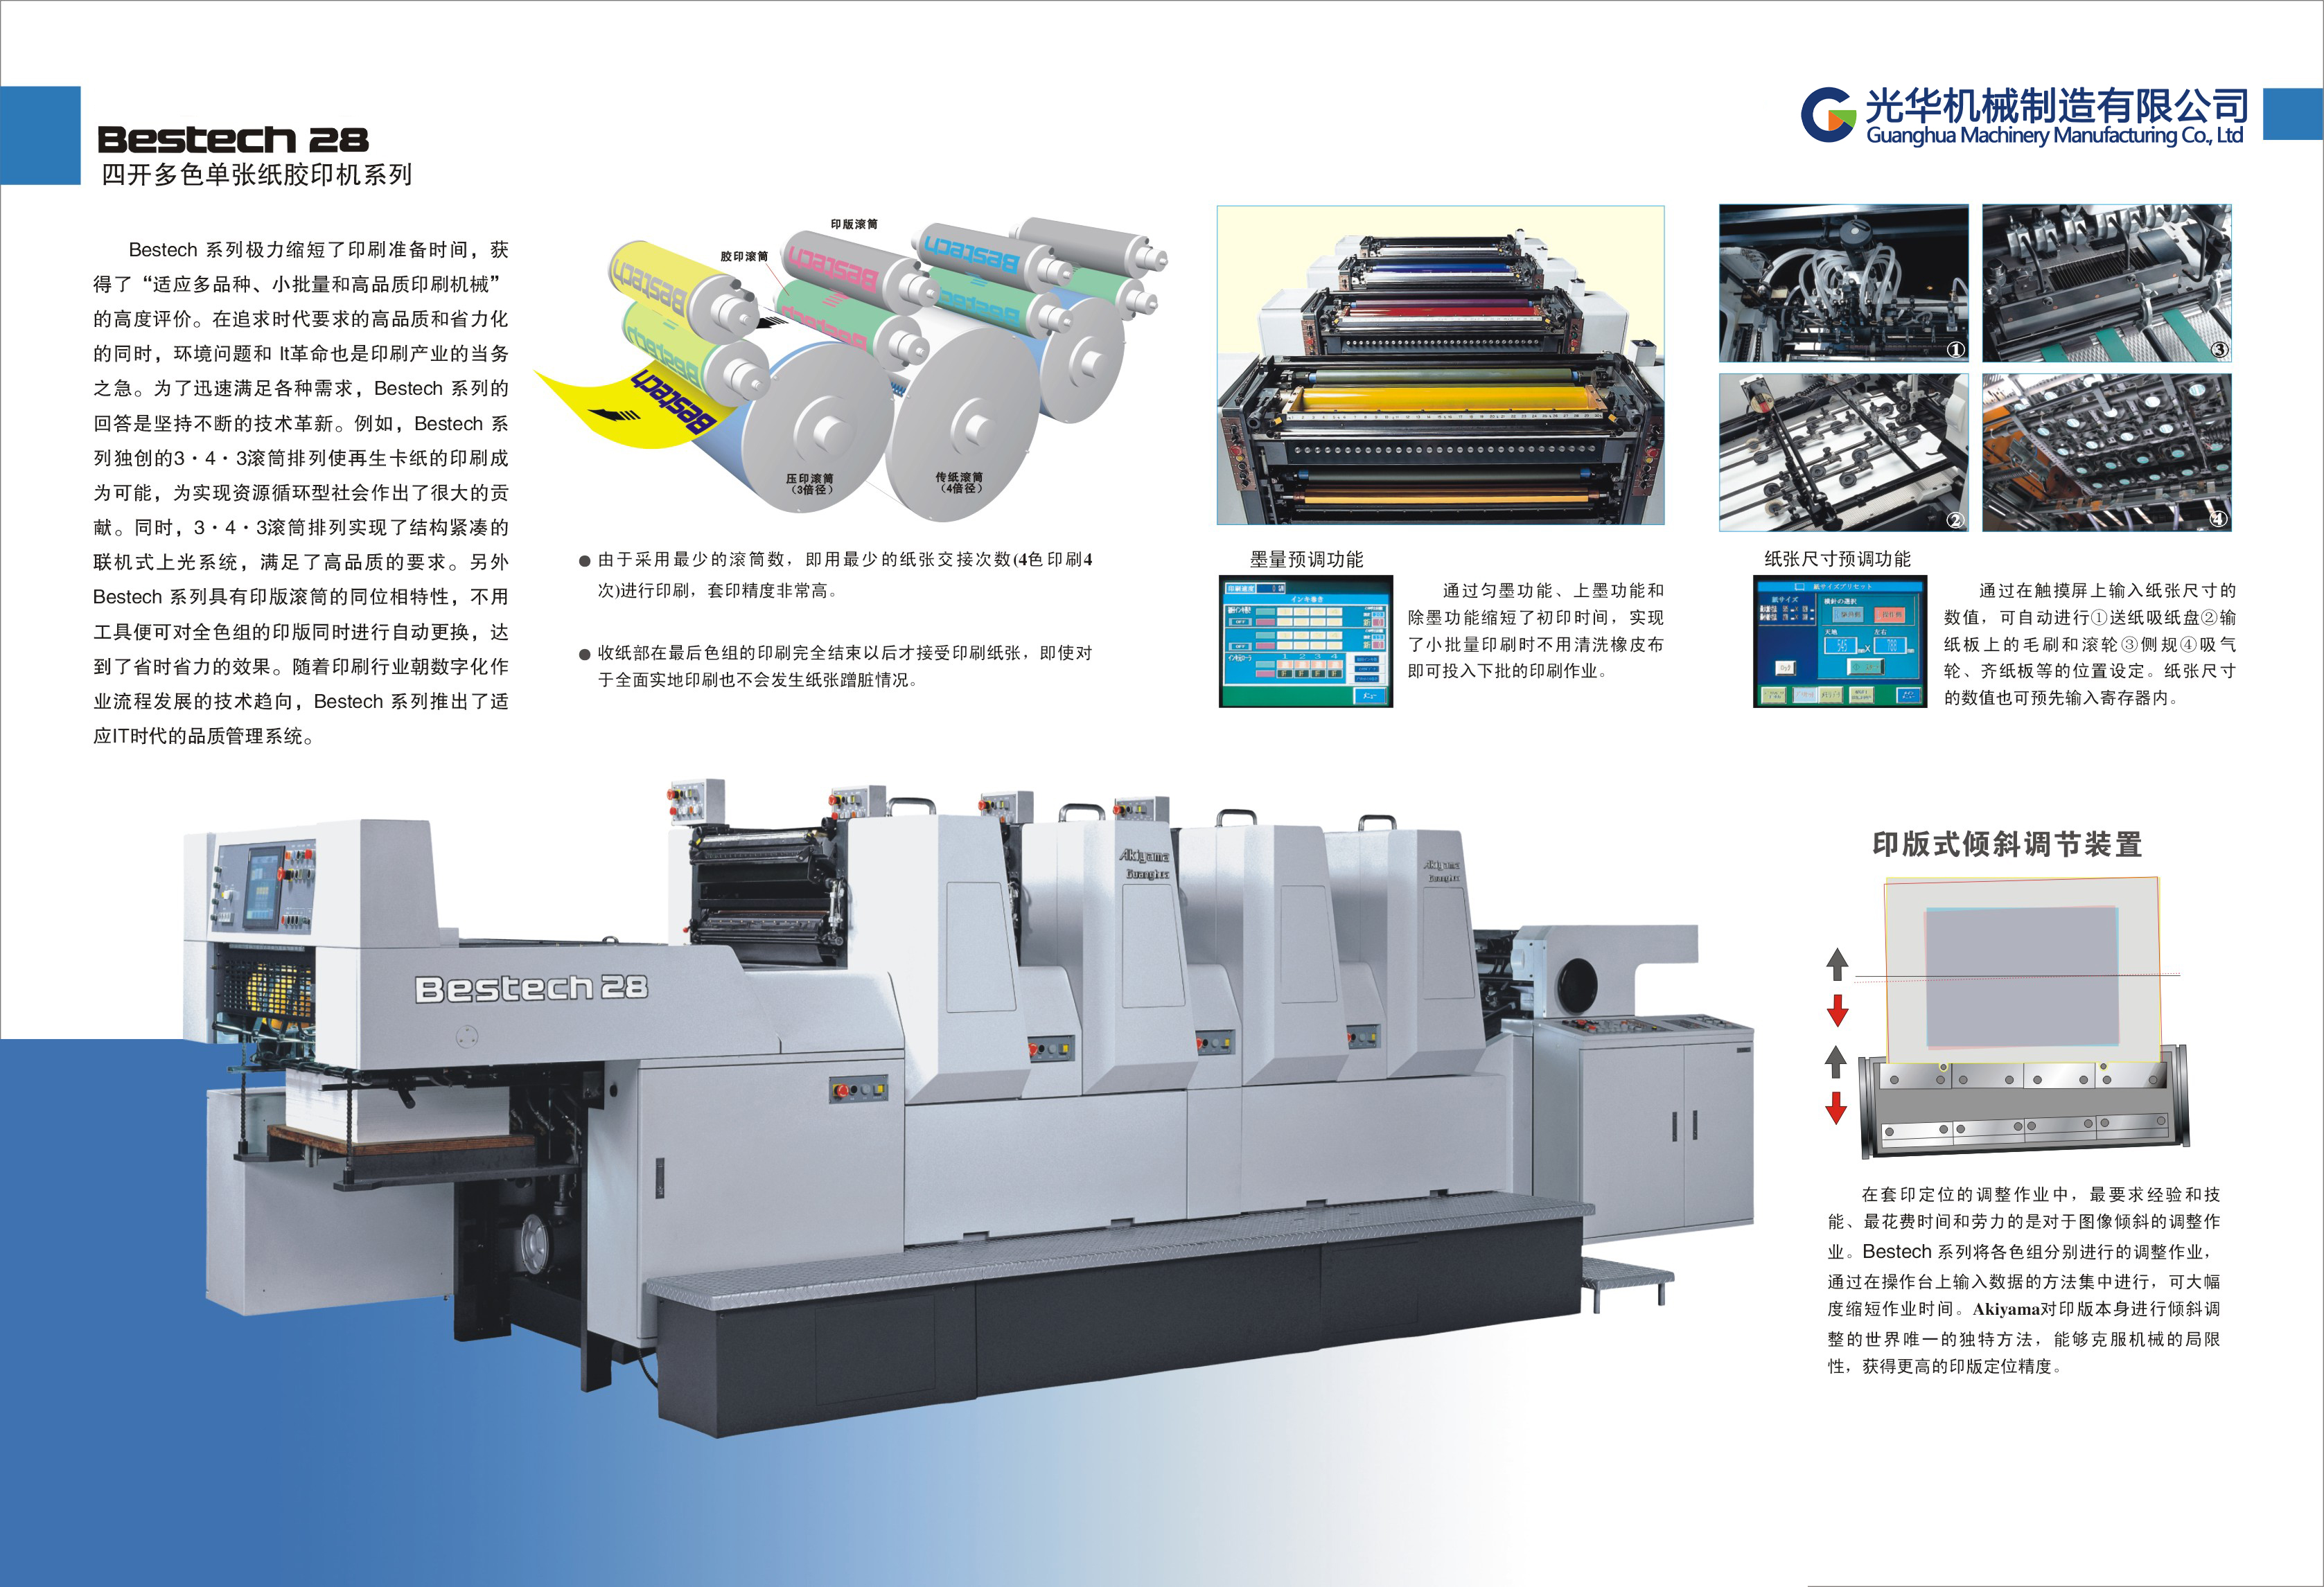 BESTECH-428  Single sheet four color offset printing machine